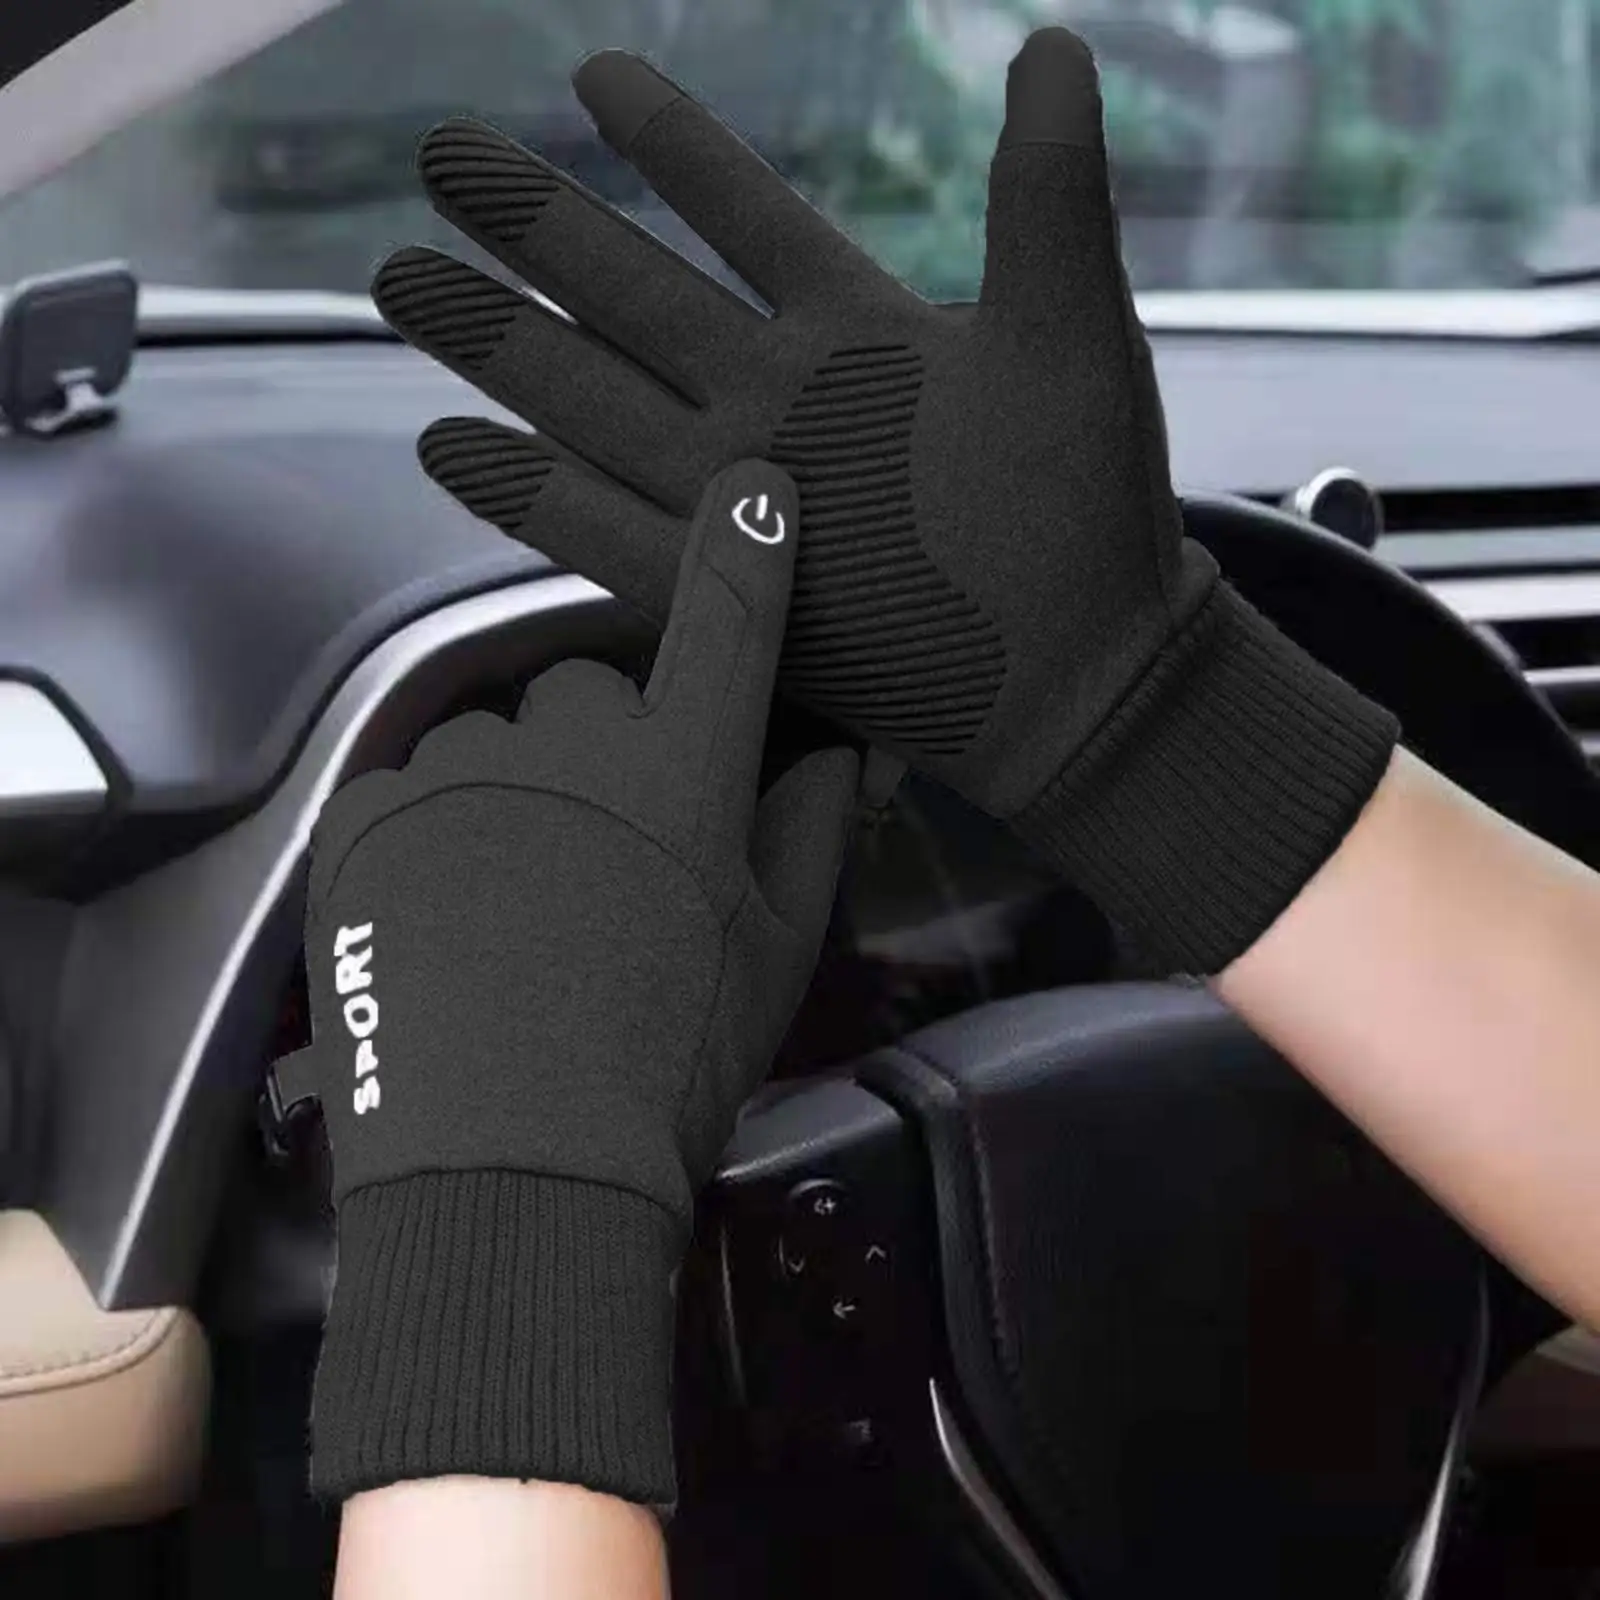 Cycling Gloves, Wear Resistant Mittens Weather Resistant Fashion Commuting Non